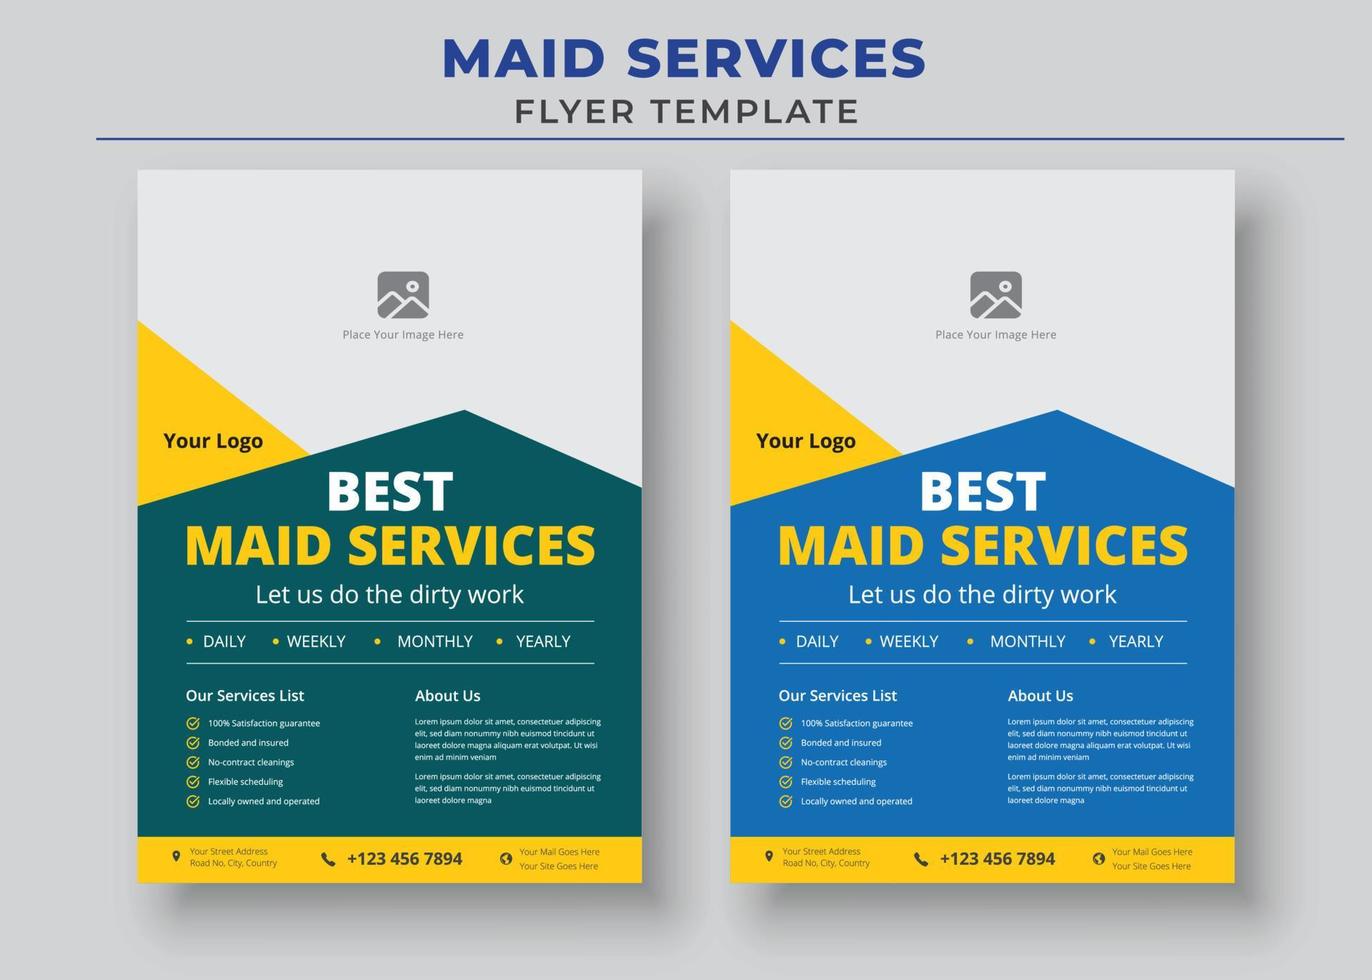 Best Maid Service poster, Maid Service Flyer Template, Housekeeping Services Flyer vector